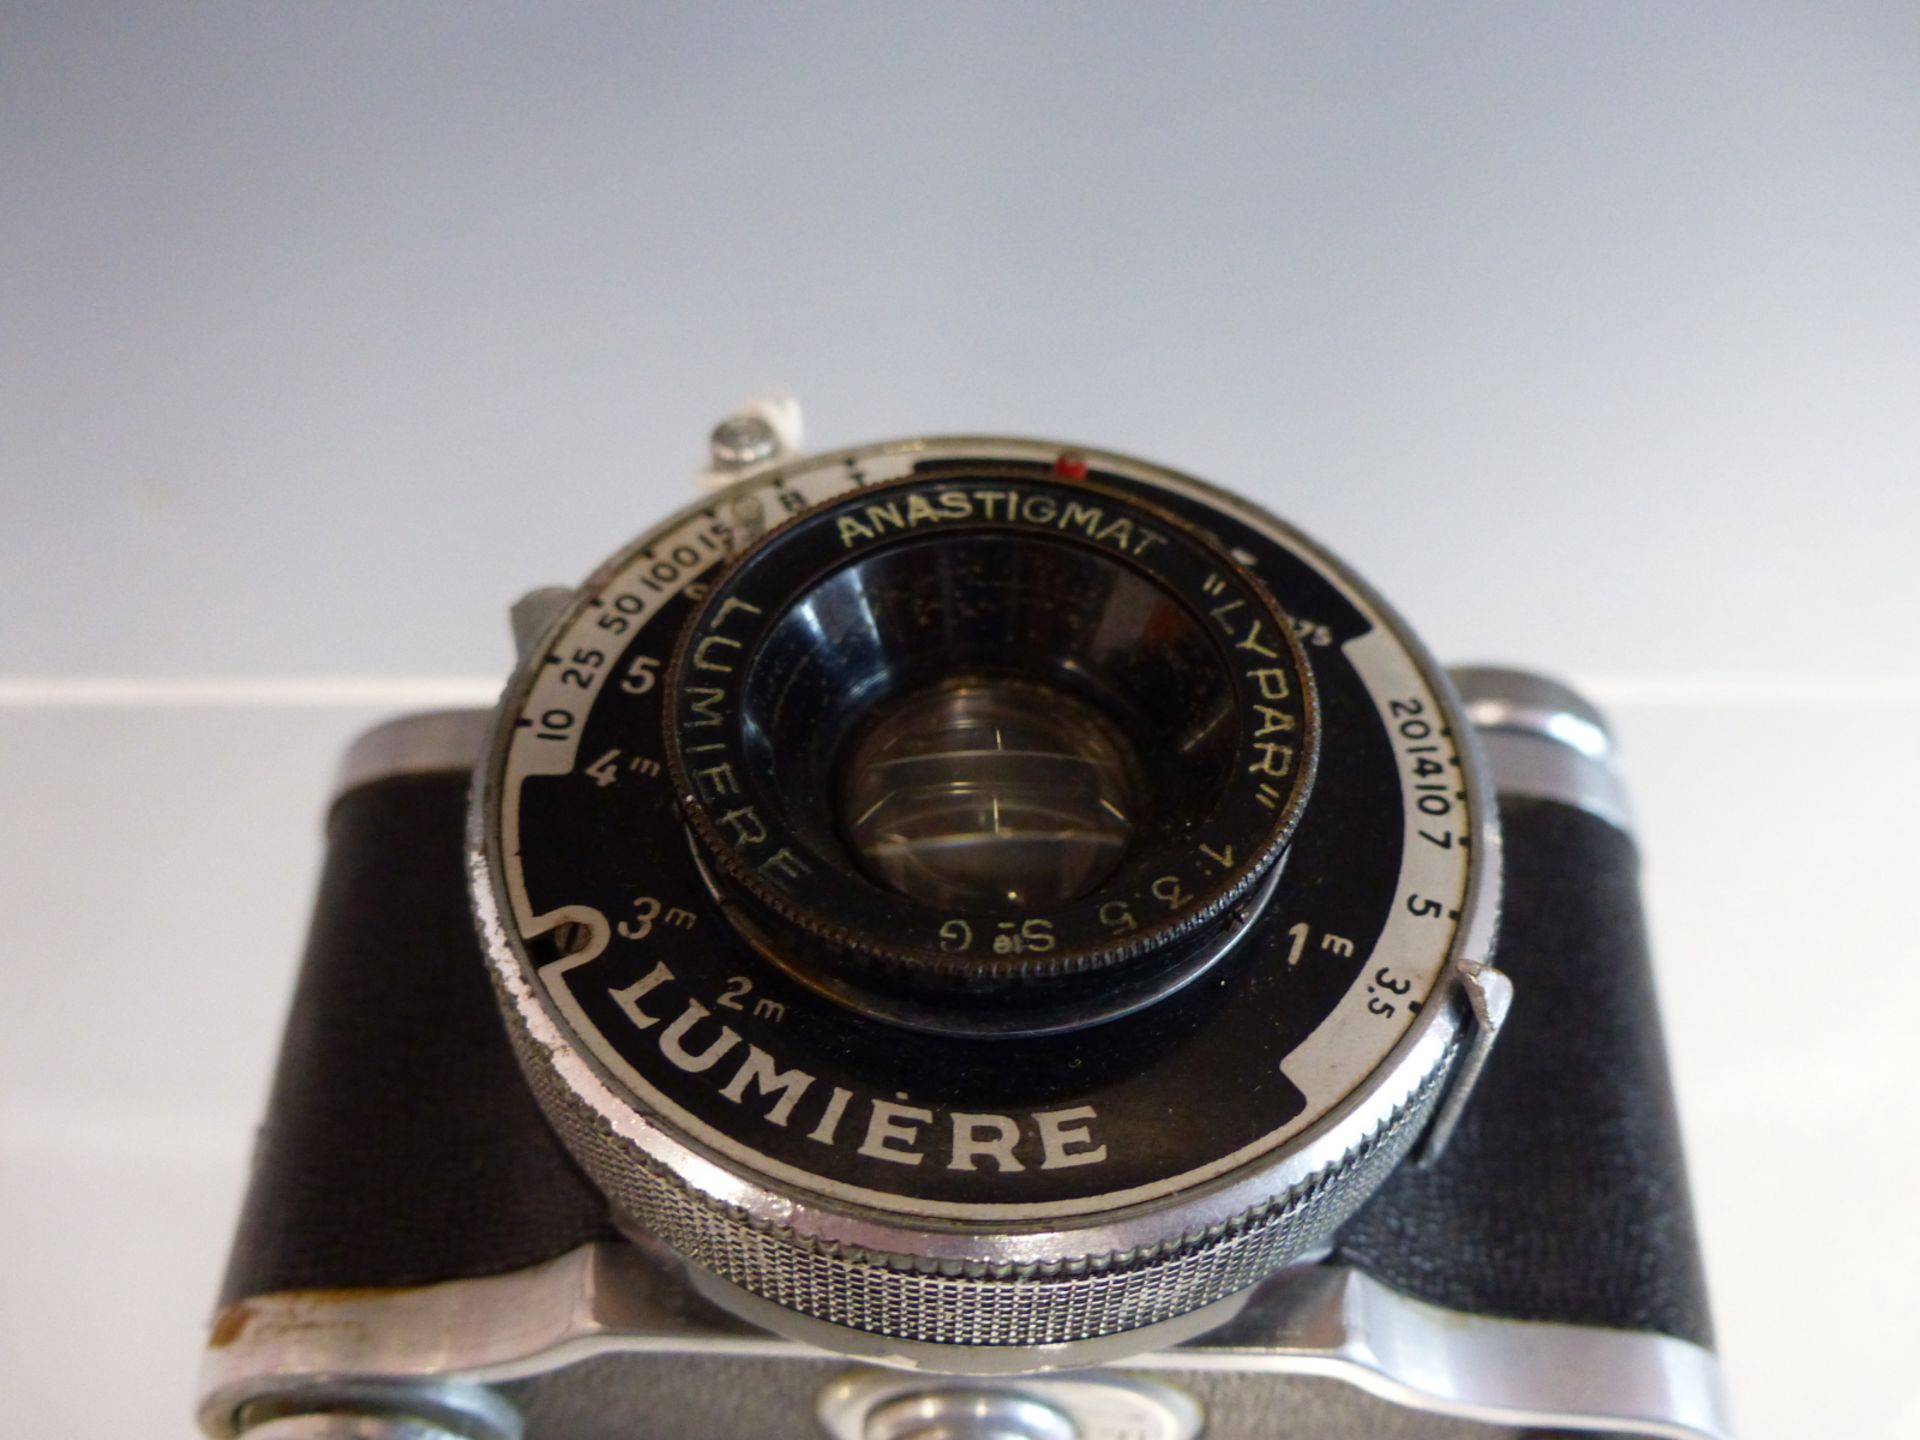 A VINTAGE ELJY LUMIERE MINIATURE ROLL FILM CAMERA WITH "LYPAR" LENS. - Image 4 of 4